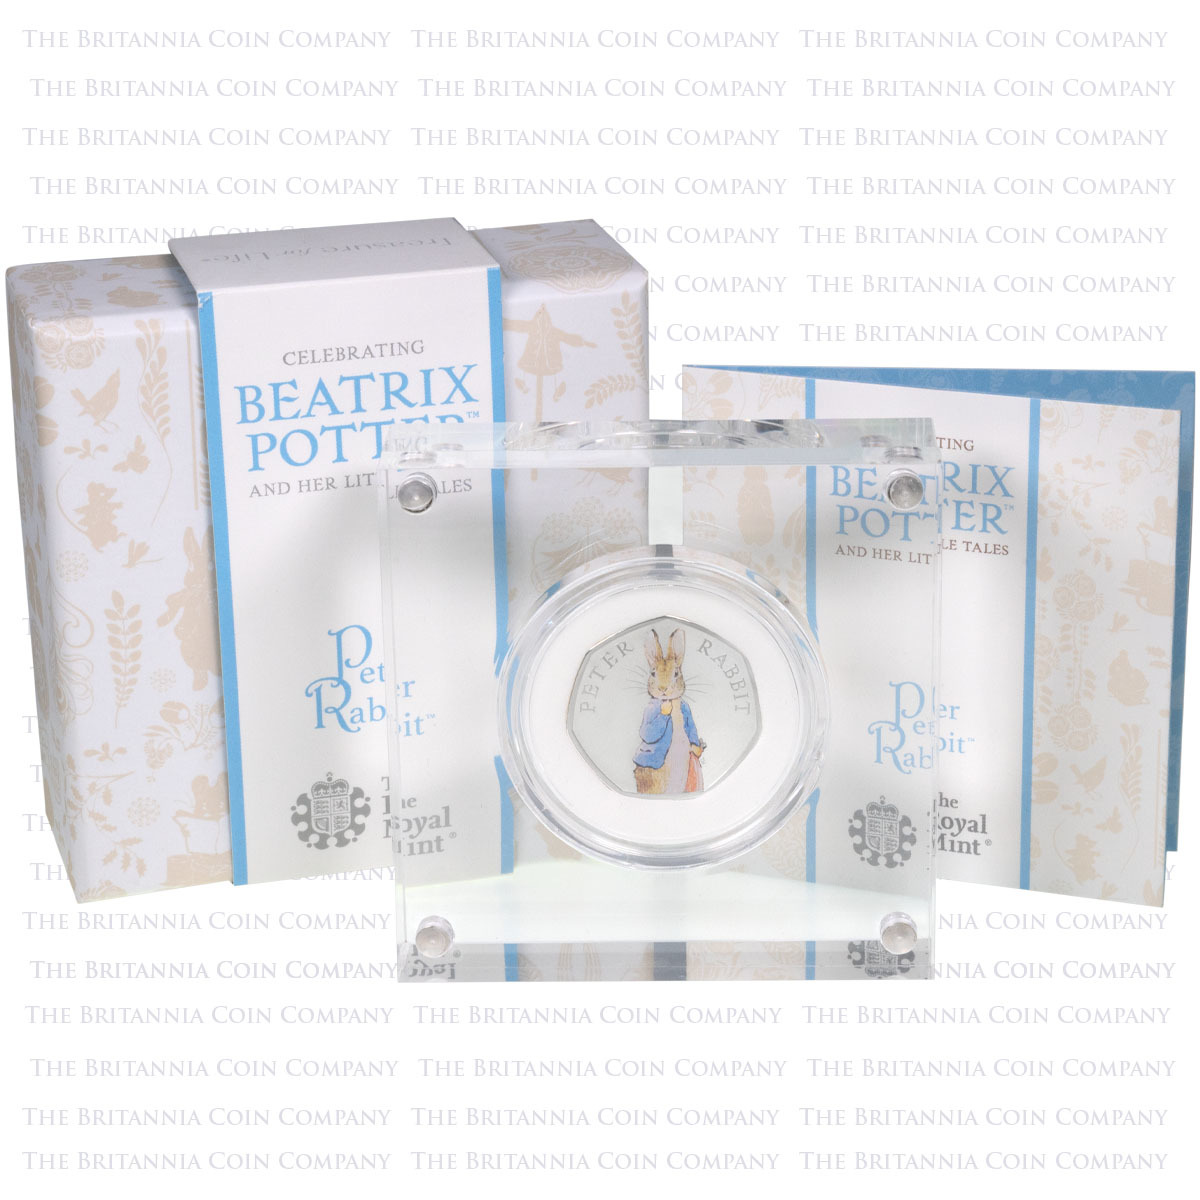 UK19PRSP 2019 Beatrix Potter Peter Rabbit Fifty Pence Colour Printed Silver Proof Coin Boxed